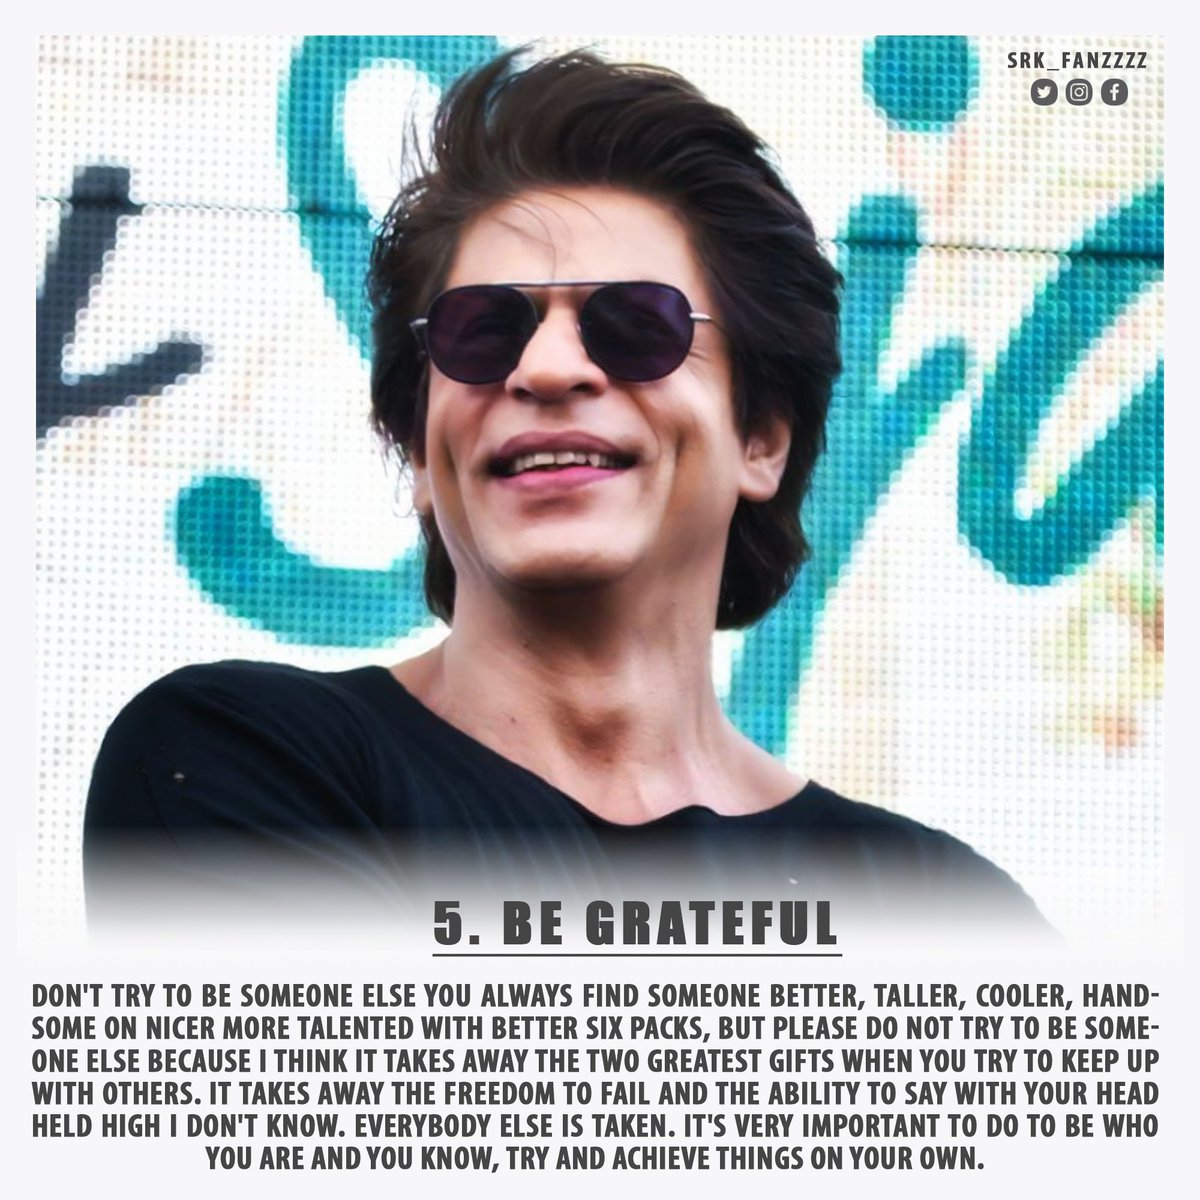 For those who need it, SHAH RUKH KHAN'S TOP 13 RULES FOR SUCCESS (2/4) @iamsrk  #HappyTeachersDay #ShahRukhKhan